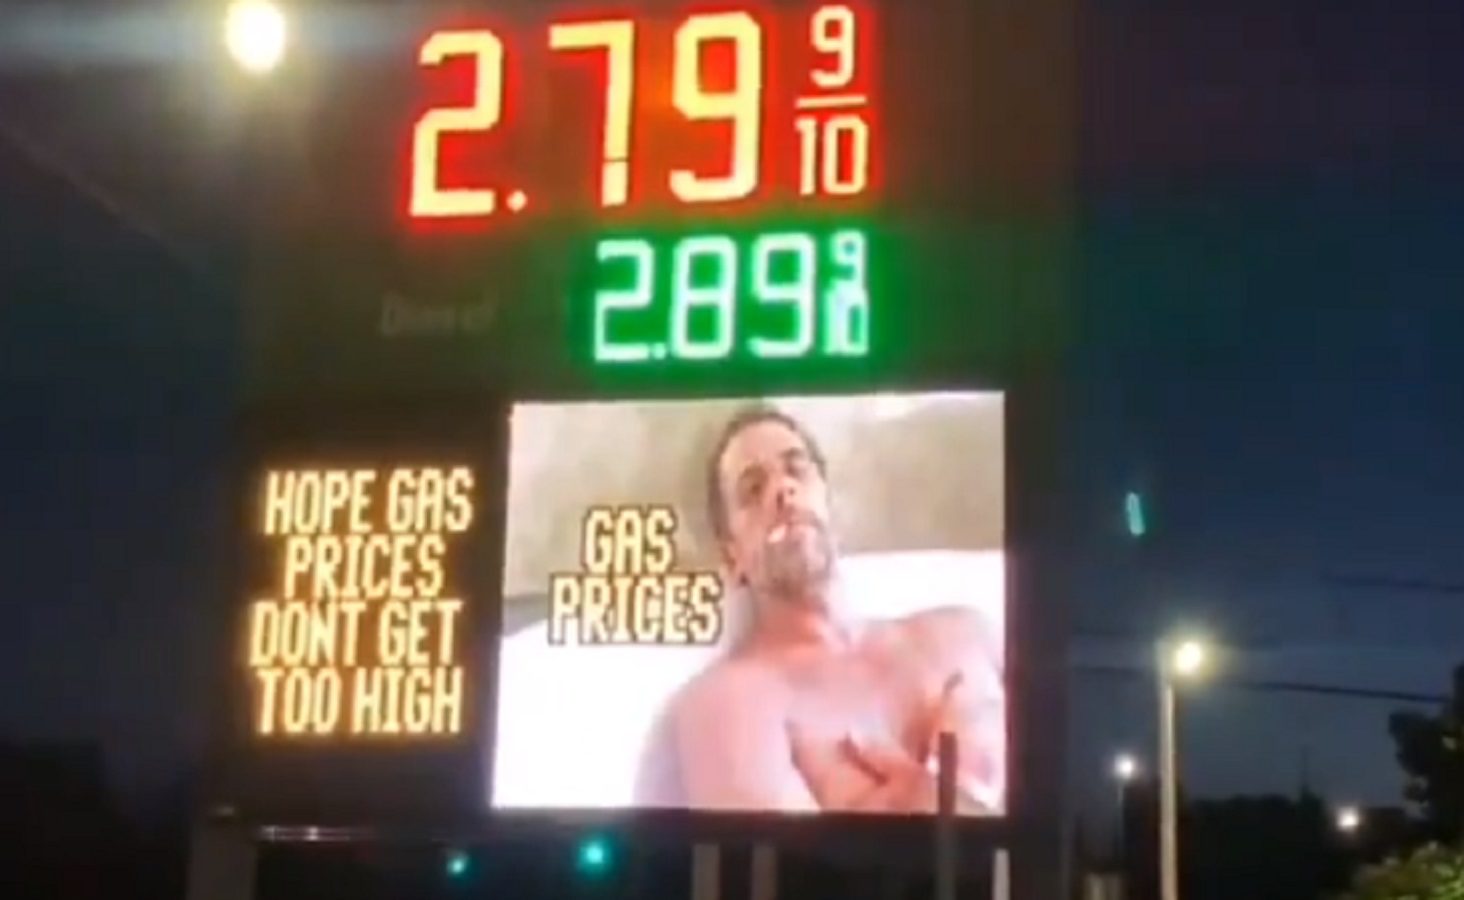 MUST WATCH: Nashville Gas Station Puts Meme of Hunter Biden on Their Sign, 'Hope Gas Prices Don't Get Too High' (VIDEO) | The Gateway Pundit | by Cassandra MacDonald